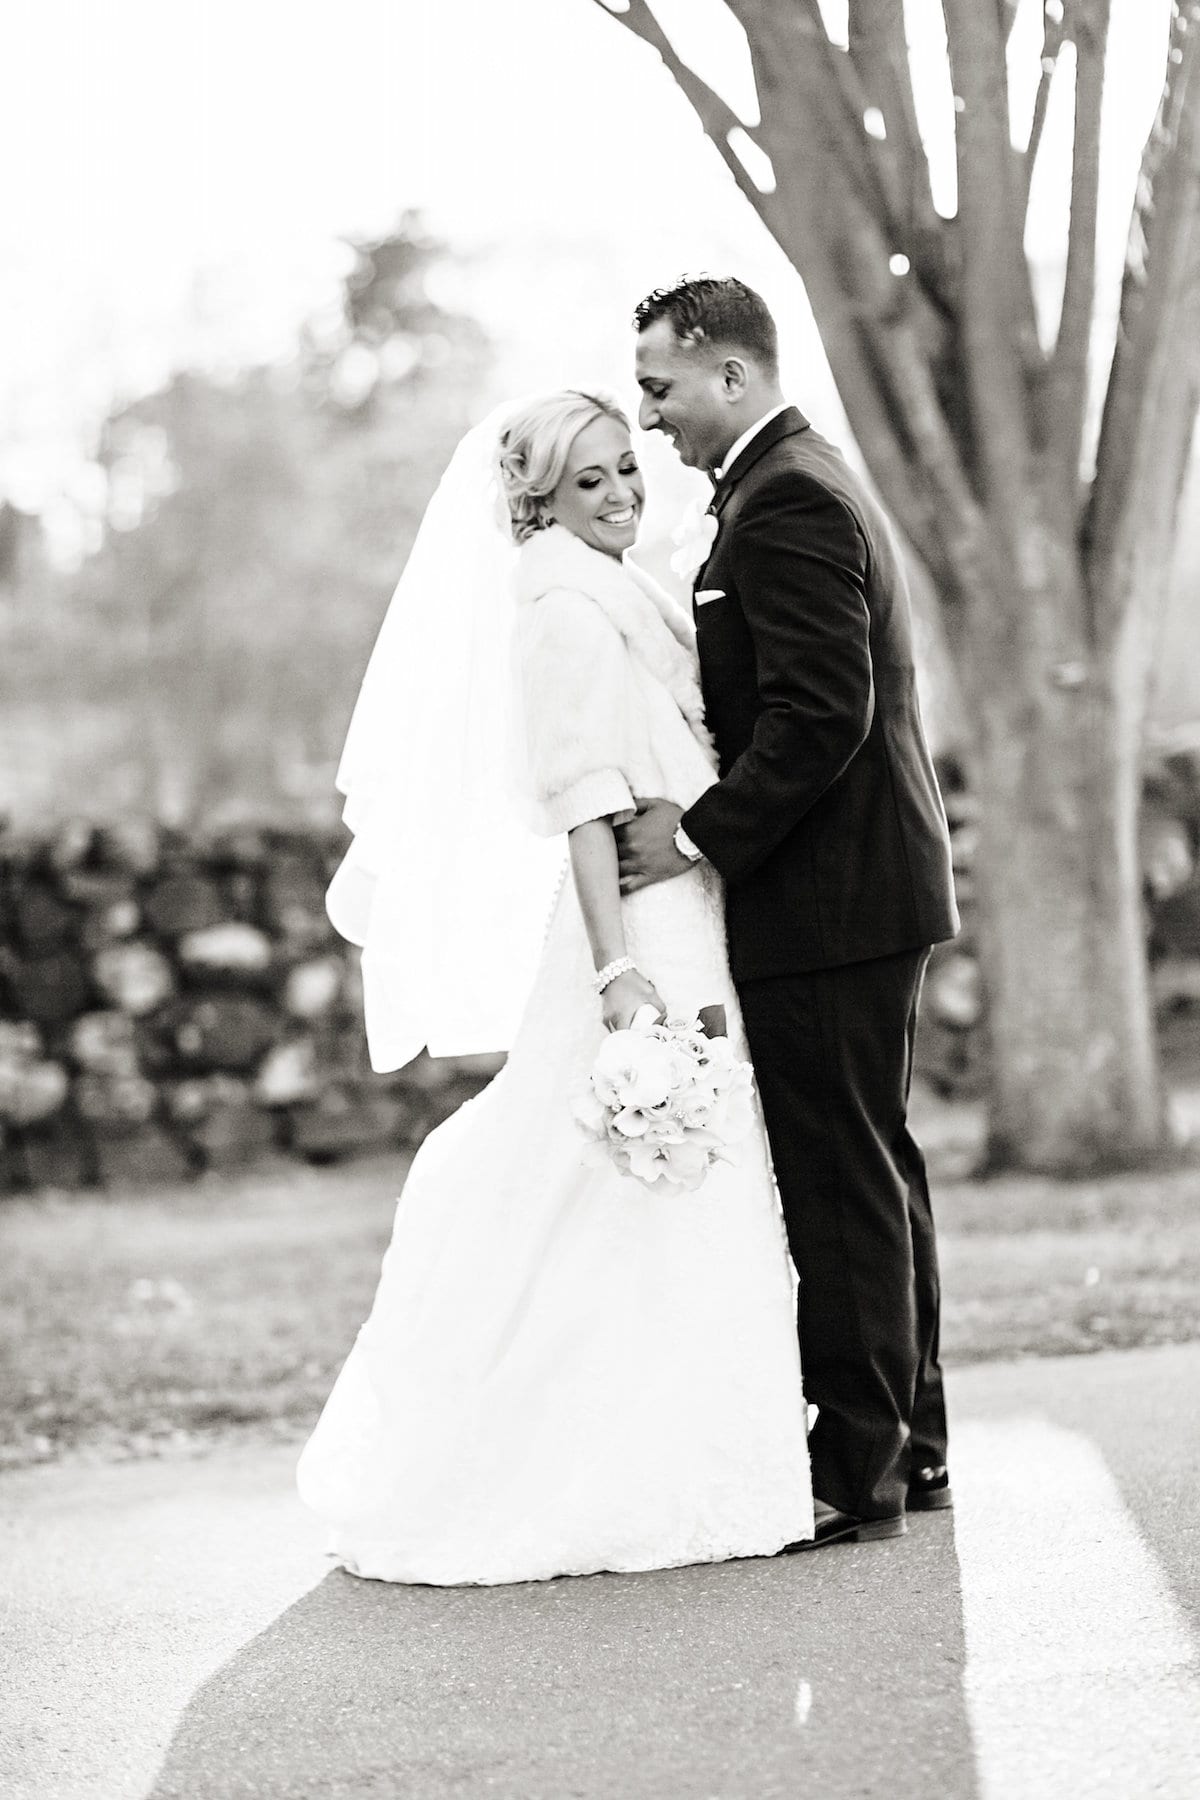 Sarah Bain and Syed Hussain were married on the grounds of the Hill-Stead Museum in Farmington. Photo by Danny Kash